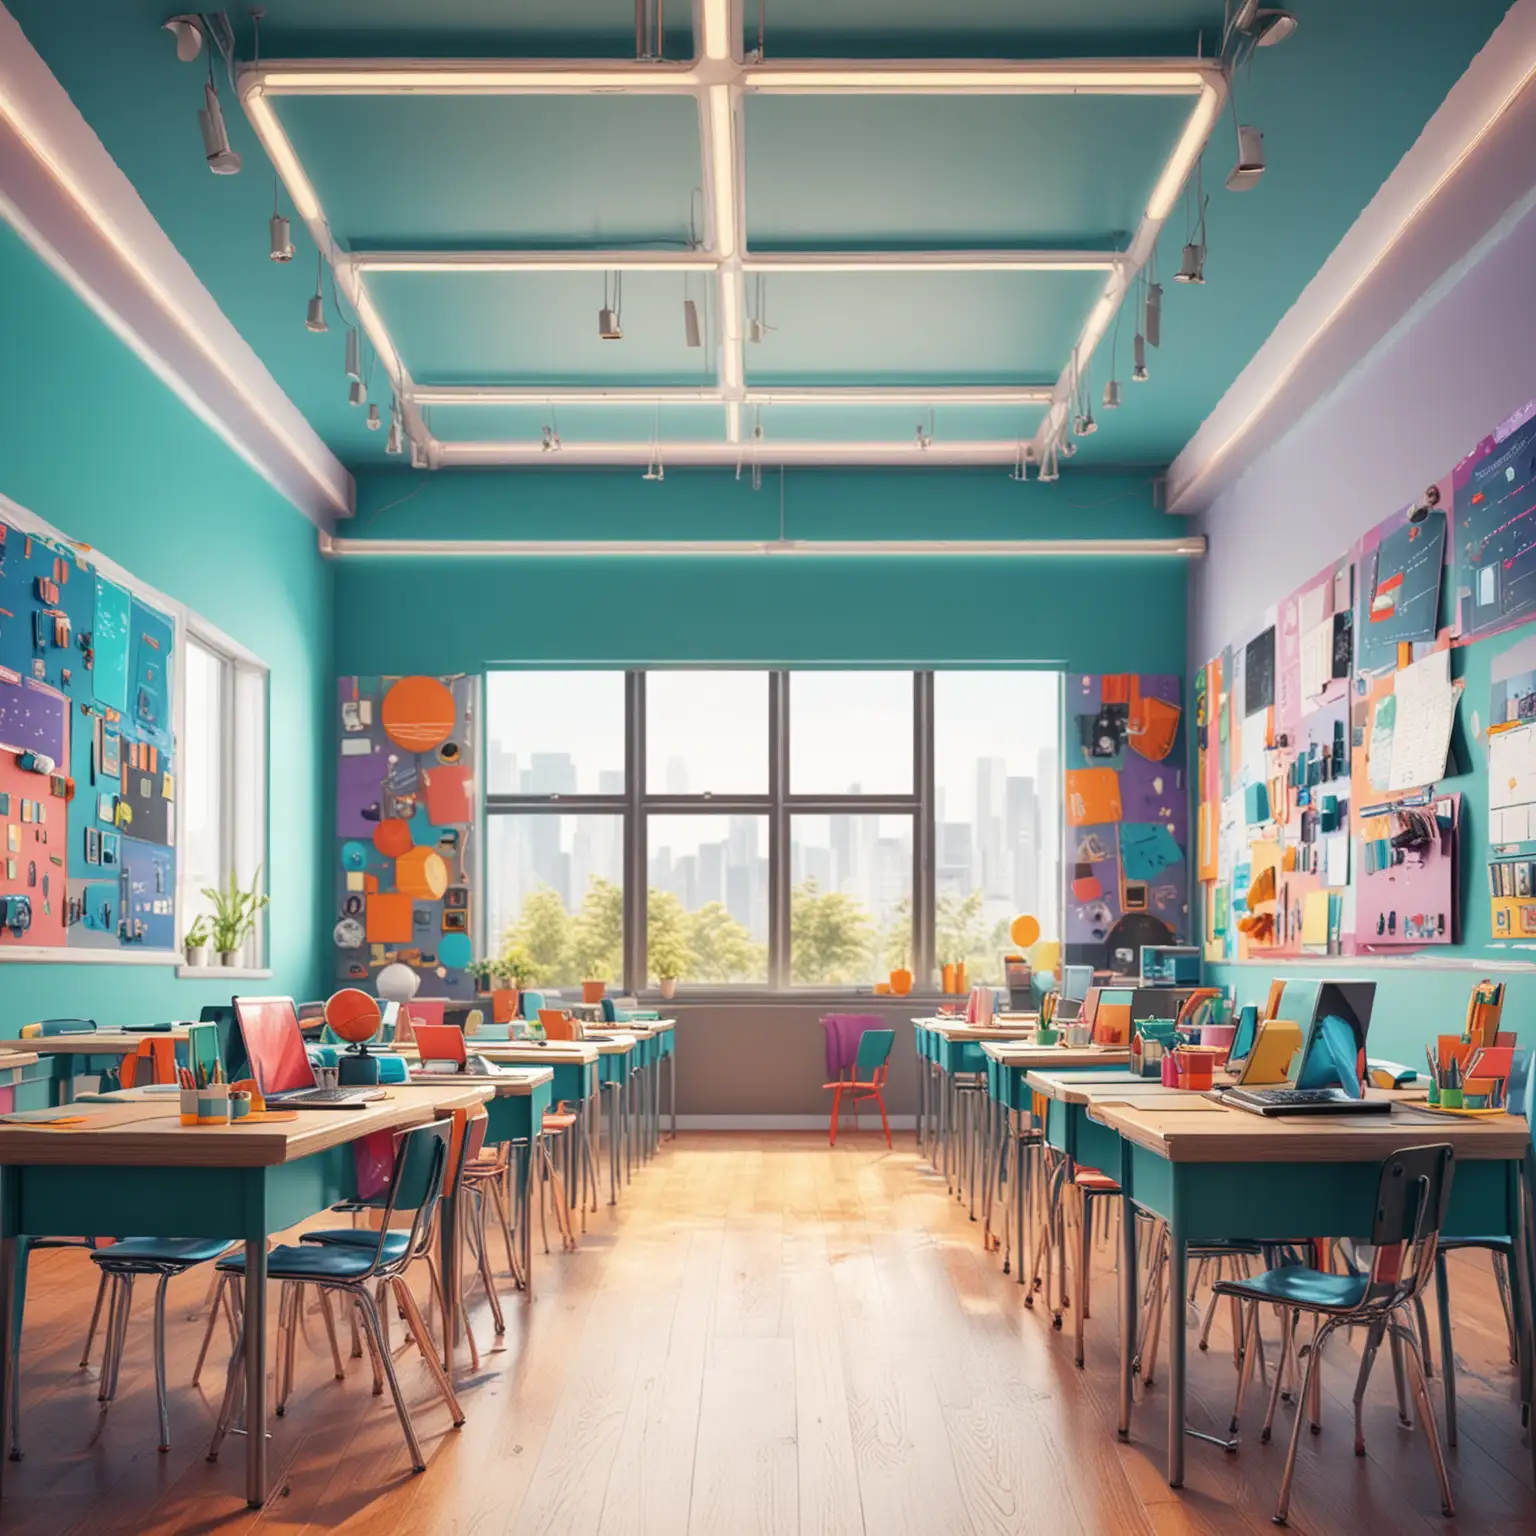 bright classroom with bold vibrant colors. elements of futuristic technology. mood of cheerful --ar--sref: <https://miramuseai.net/record/151056->